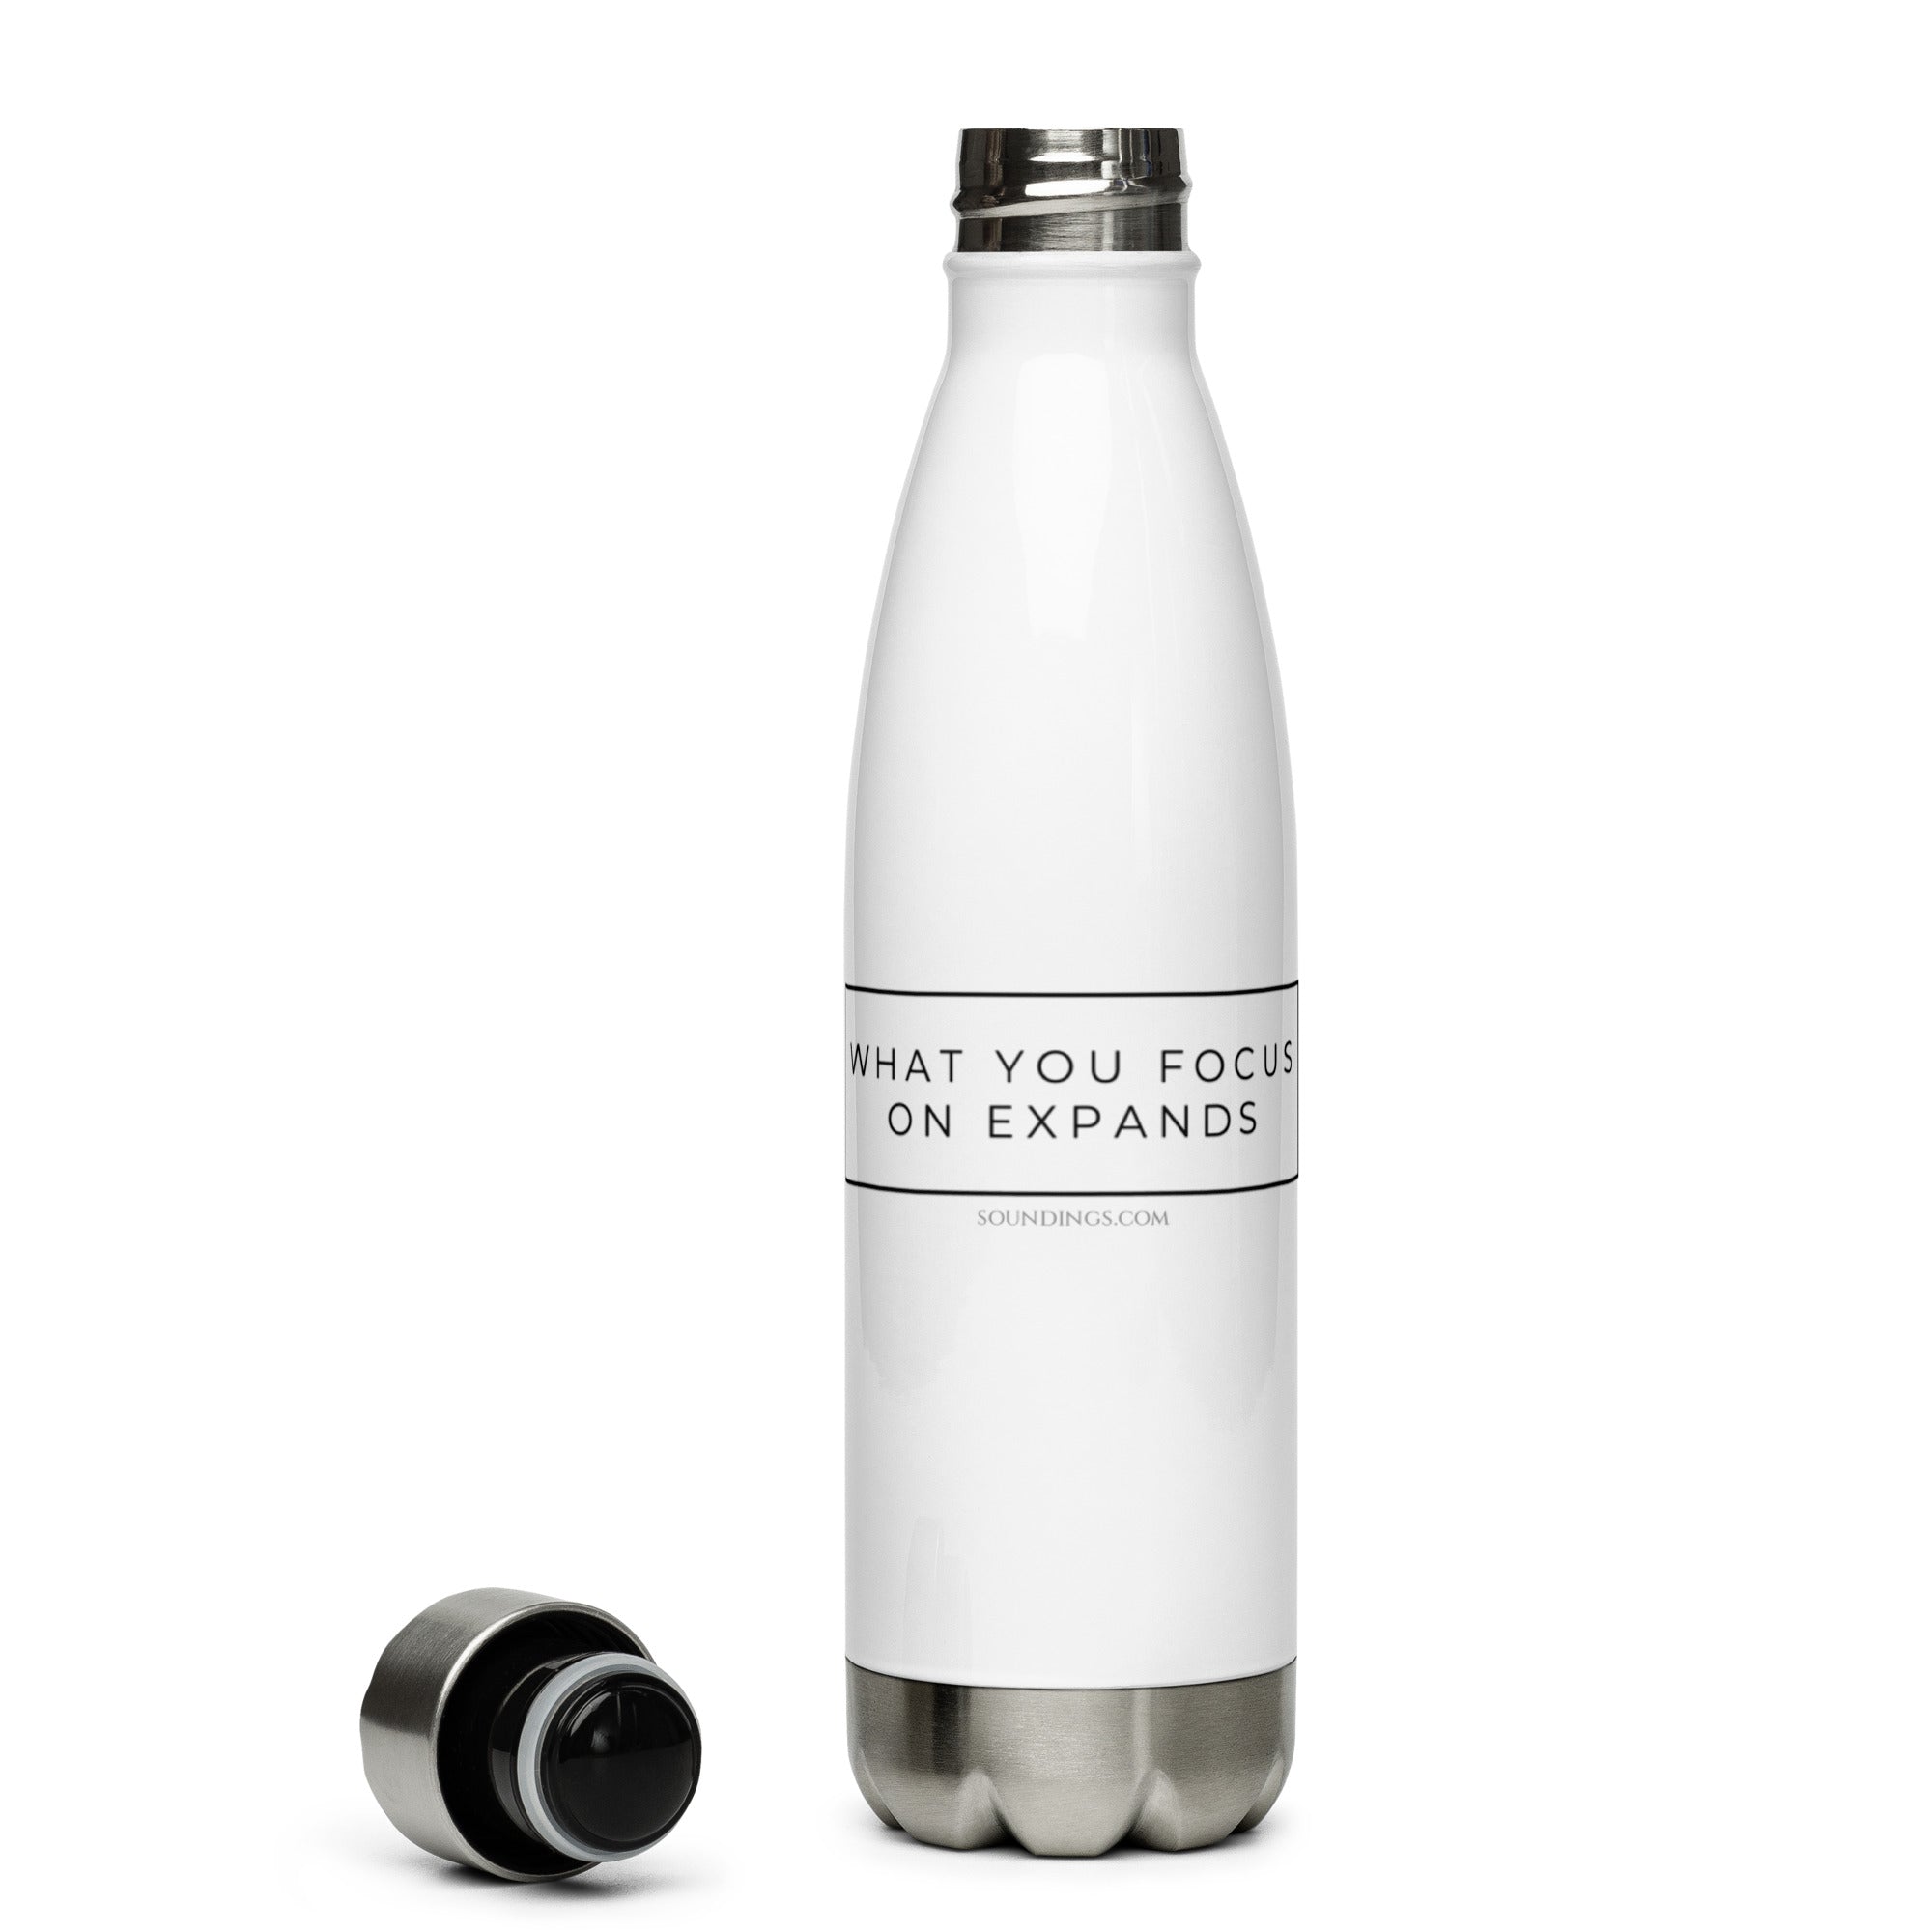 Double-walled stainless steel water bottle - "WHAT YOU FOCUS ON EXPANDS"